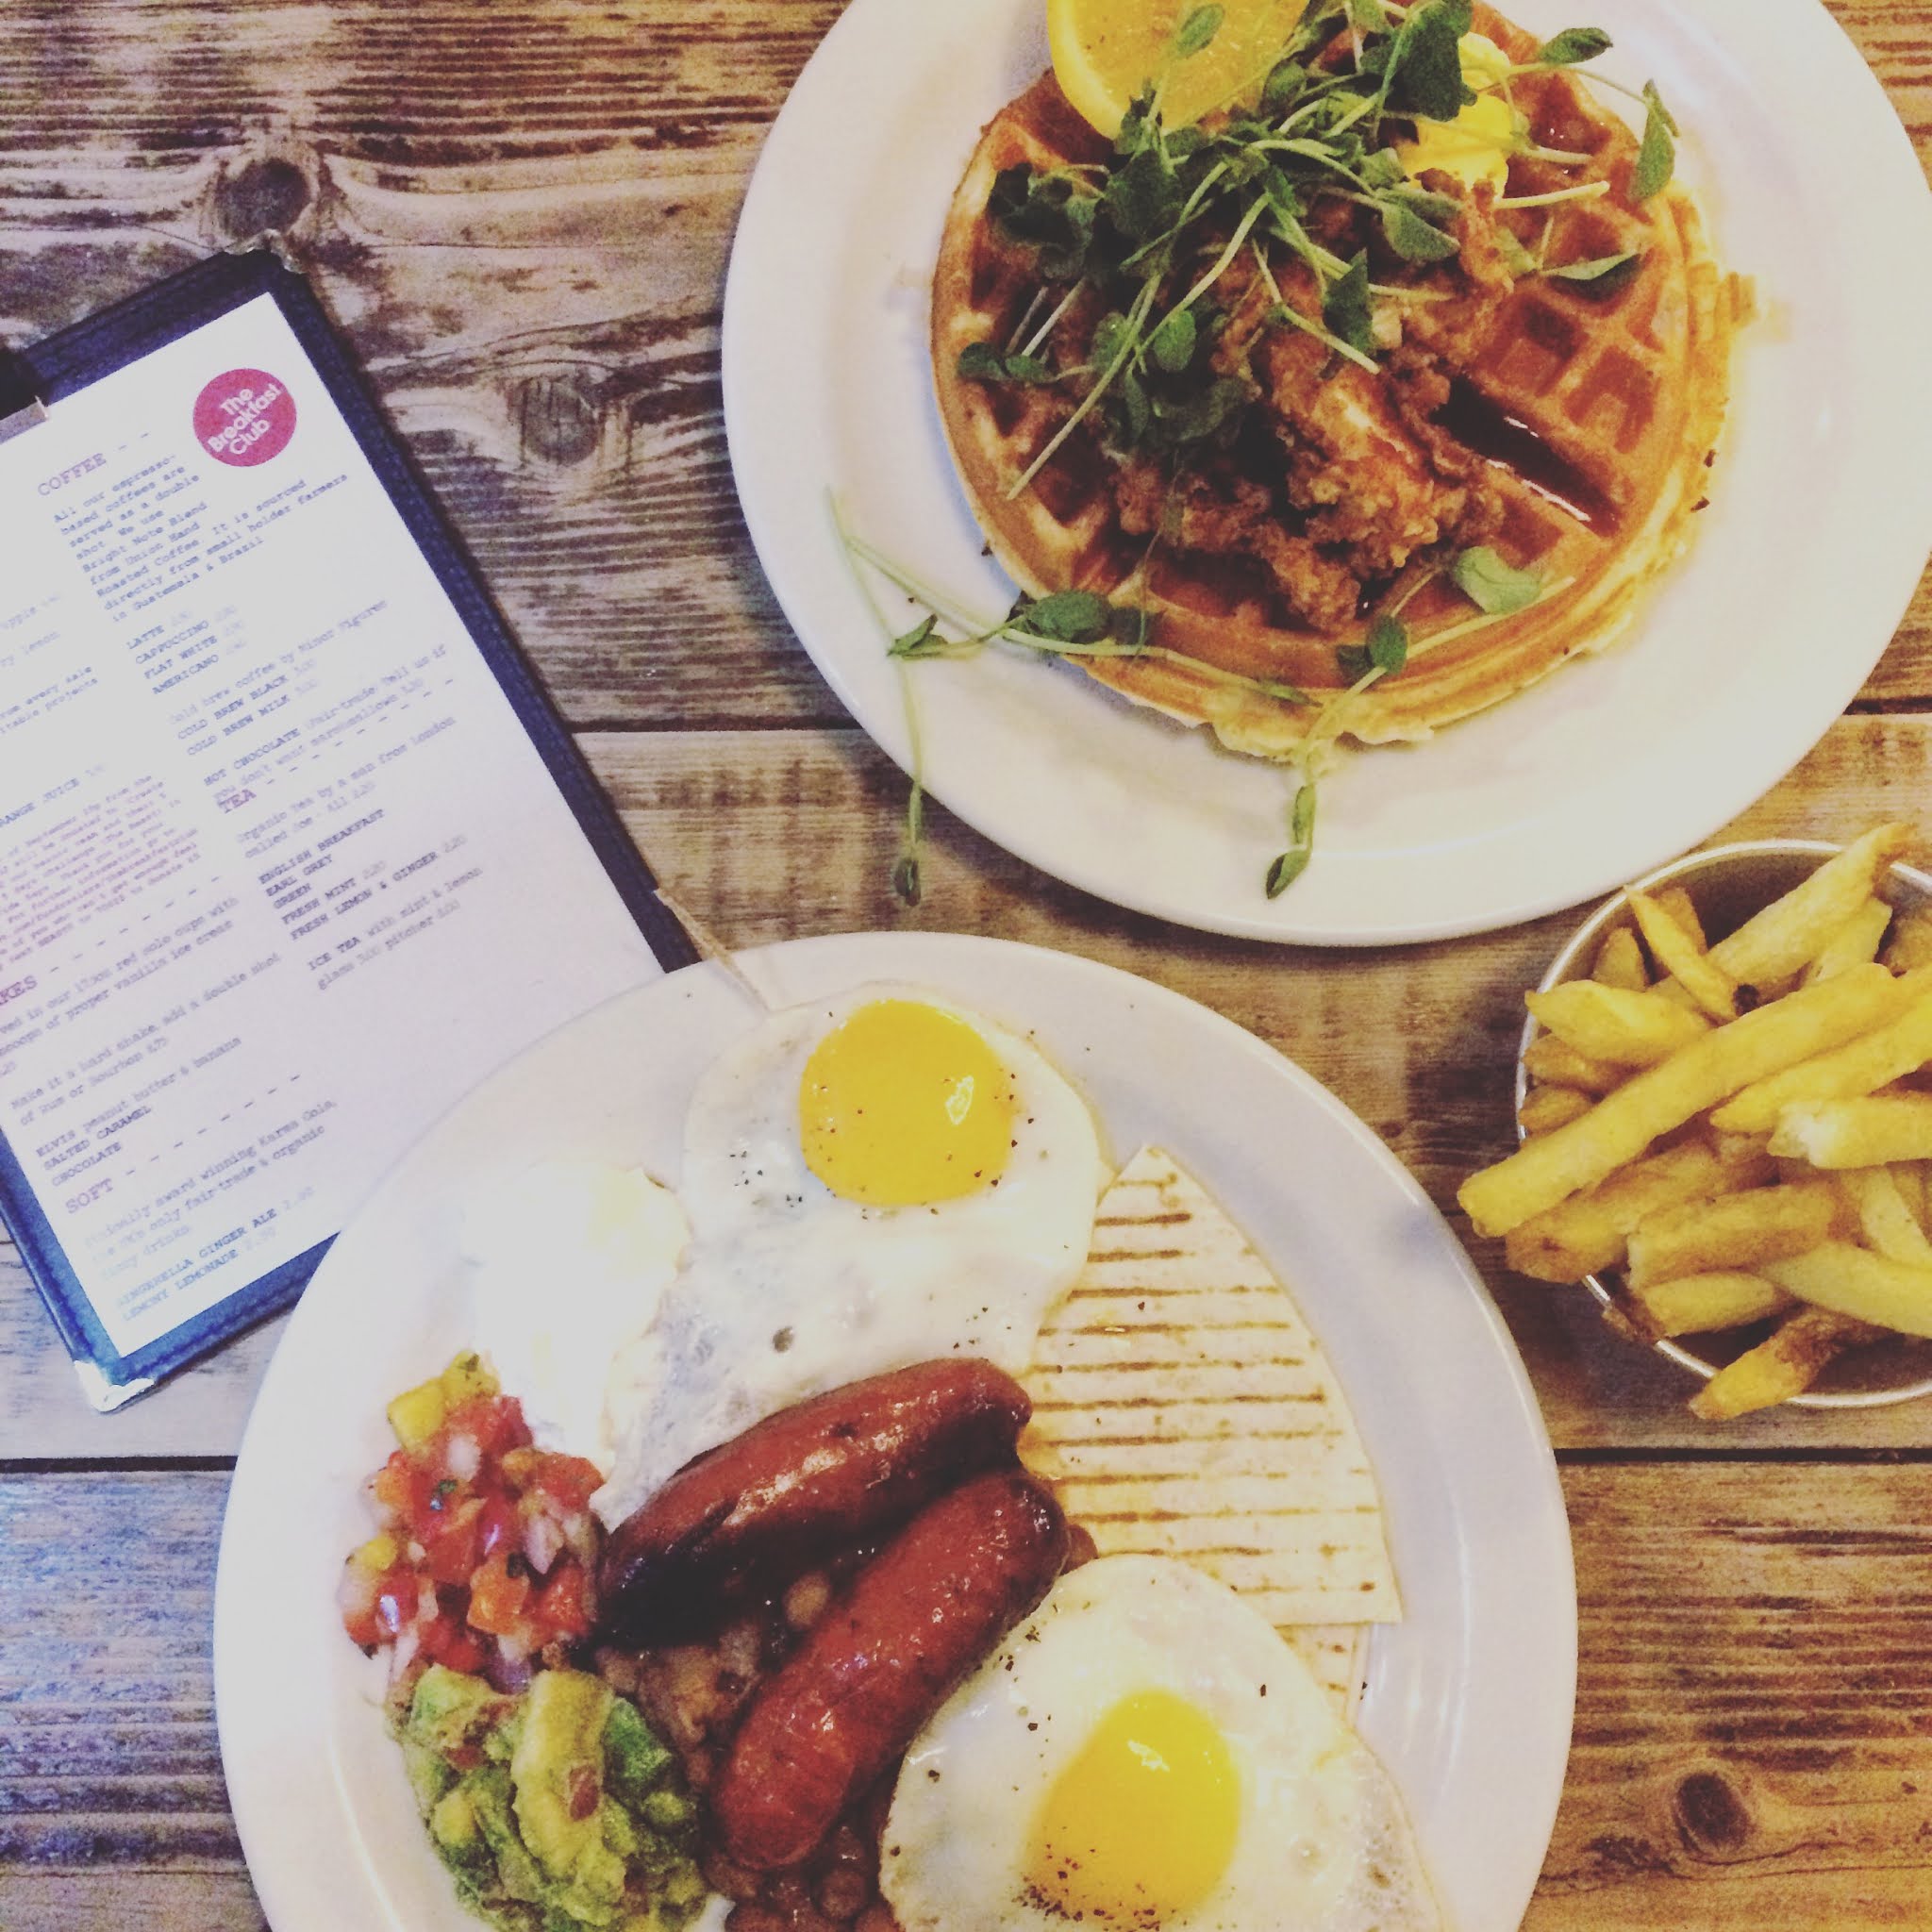 Fried chicken and waffles and Huevos Rancheros at the breakfast club, one of the best east london breakfast spots